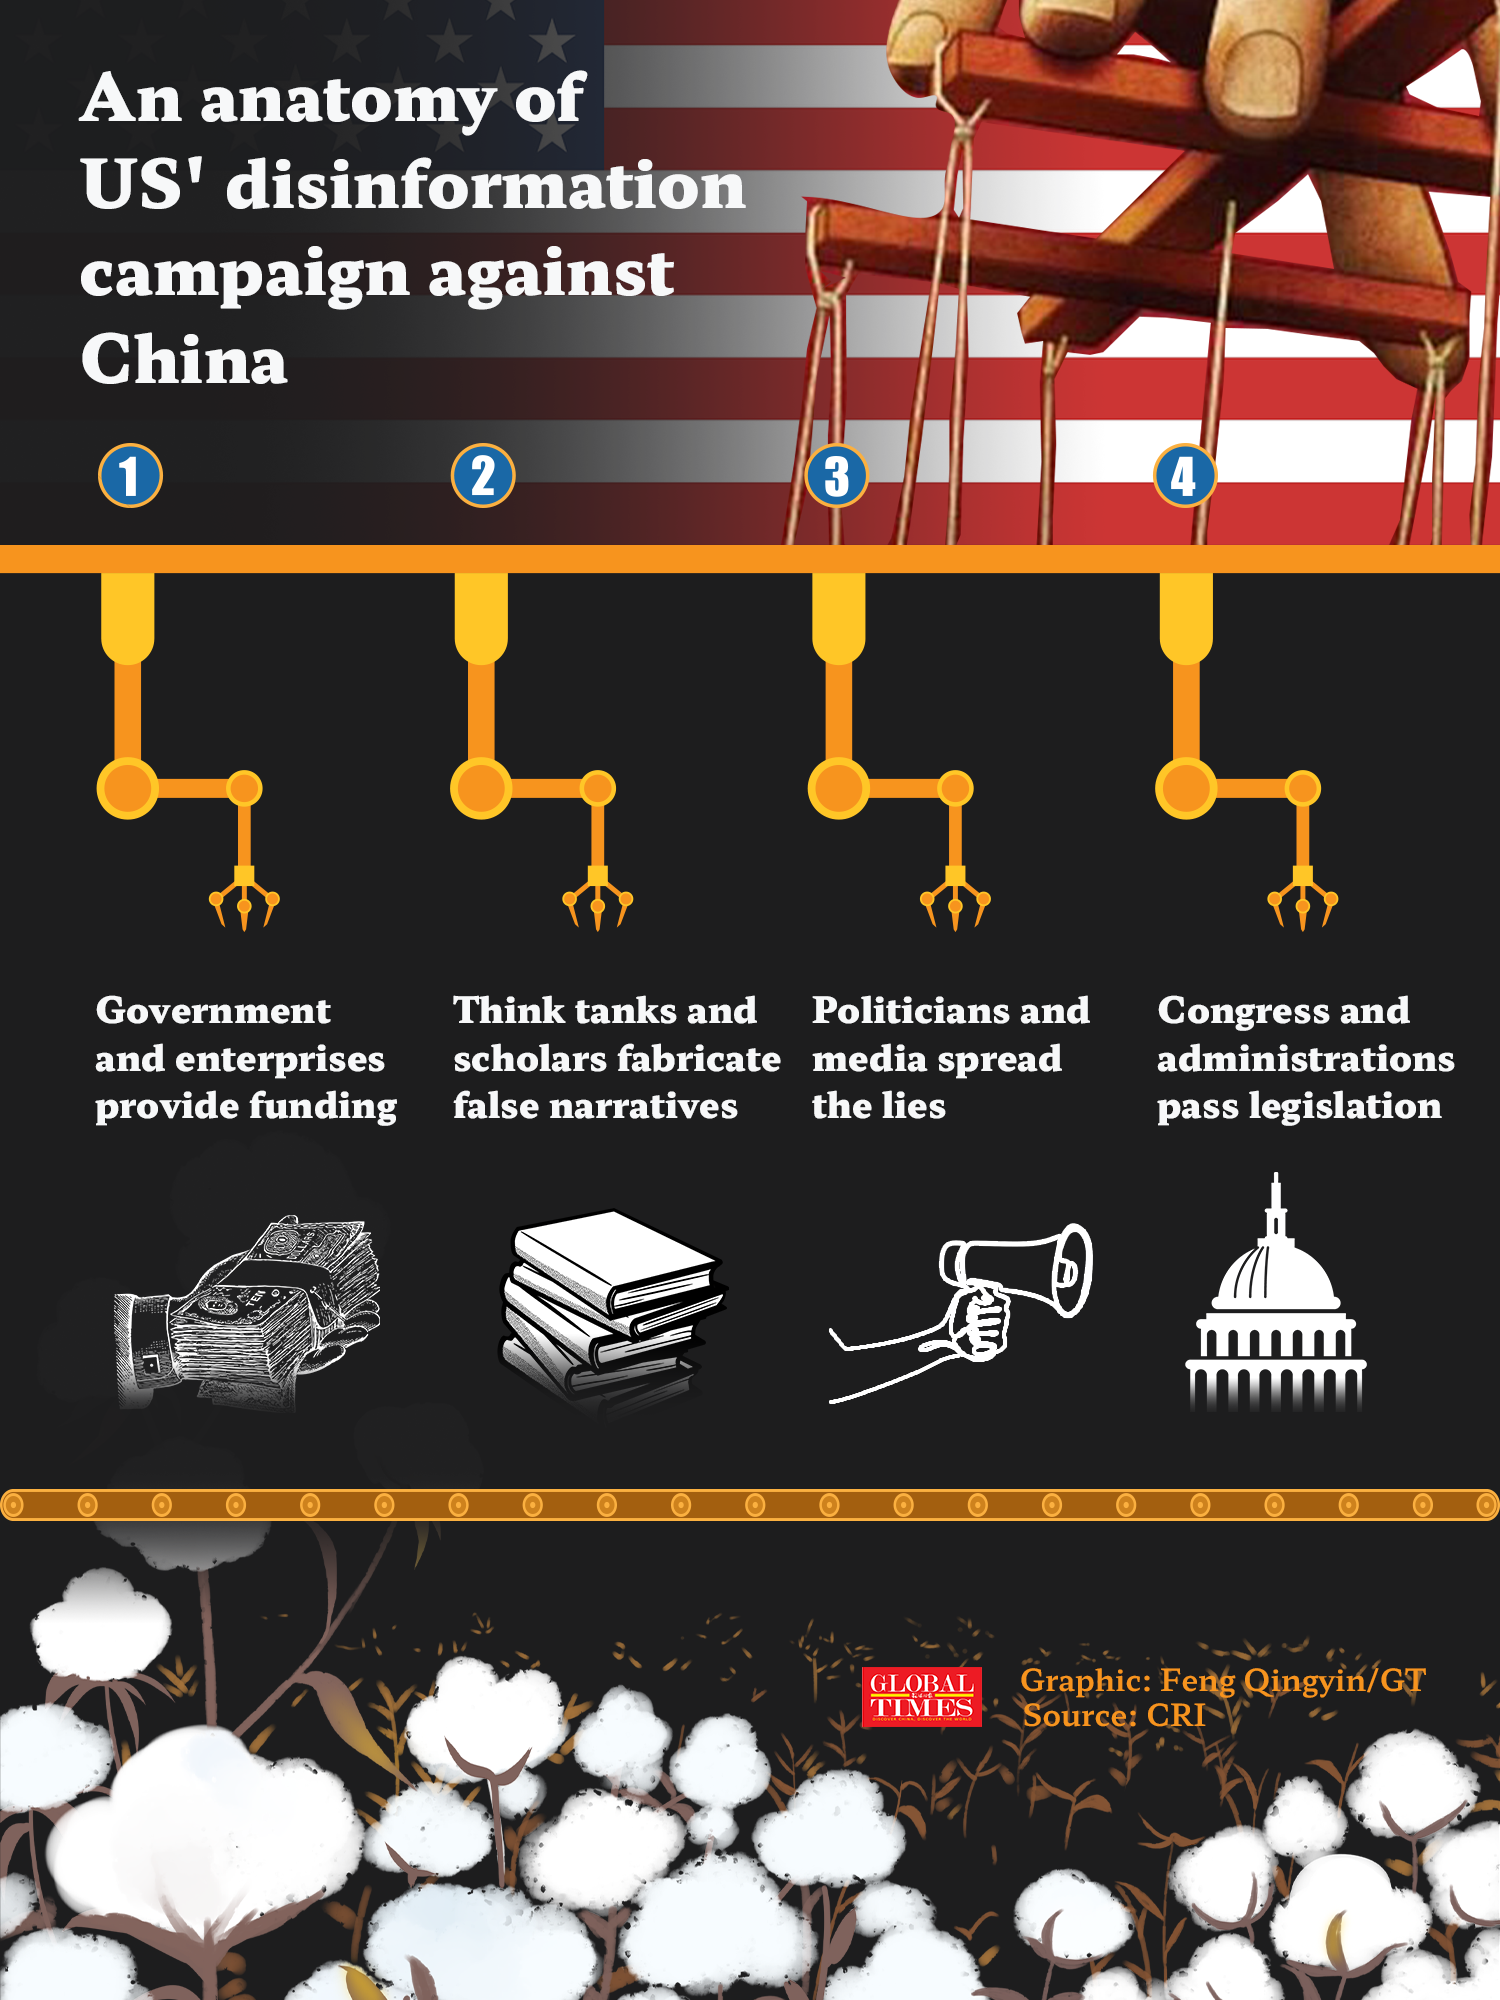 The graphic shows a four-step scheme of US' malicious slander against China. From govt, think thanks to the media, US' disinformation machines fabricate lies and pave the way for legislation that aims to contain China. Graphic: Feng Qingyin/GT